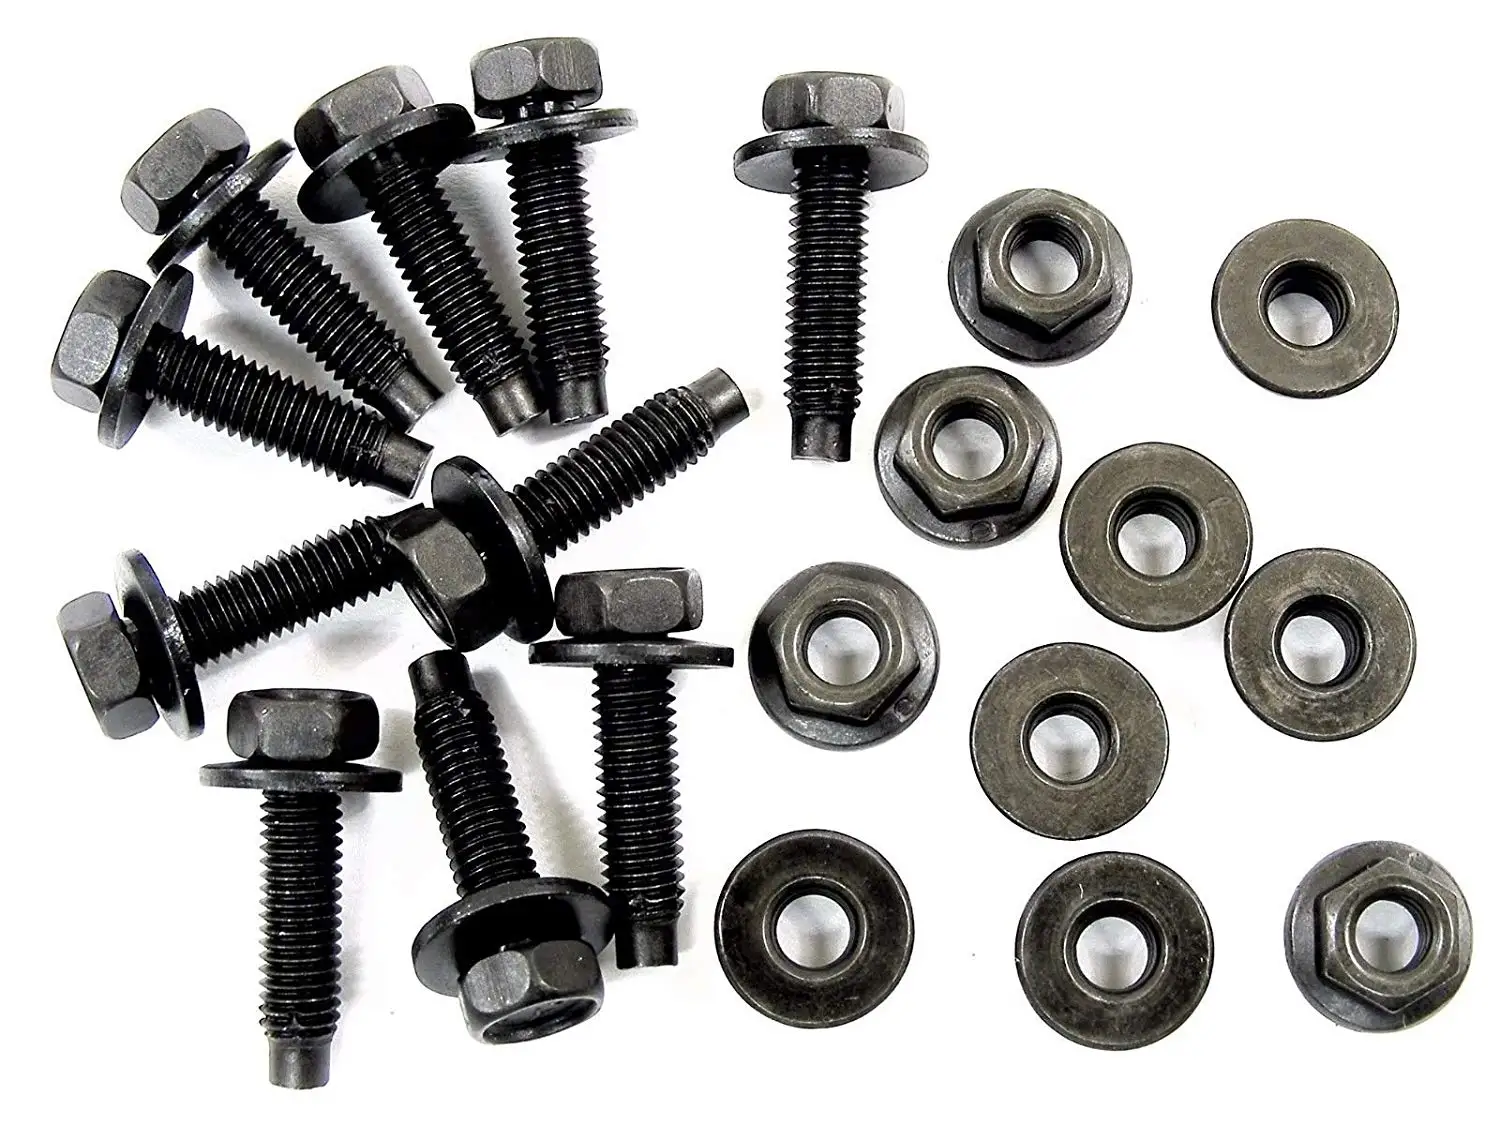 M6 x 18mm FLANGE BOLTS 4 PIECES BOLTS FOR 150cc GY6 MOTORS ON CHINESE SCOOTERS